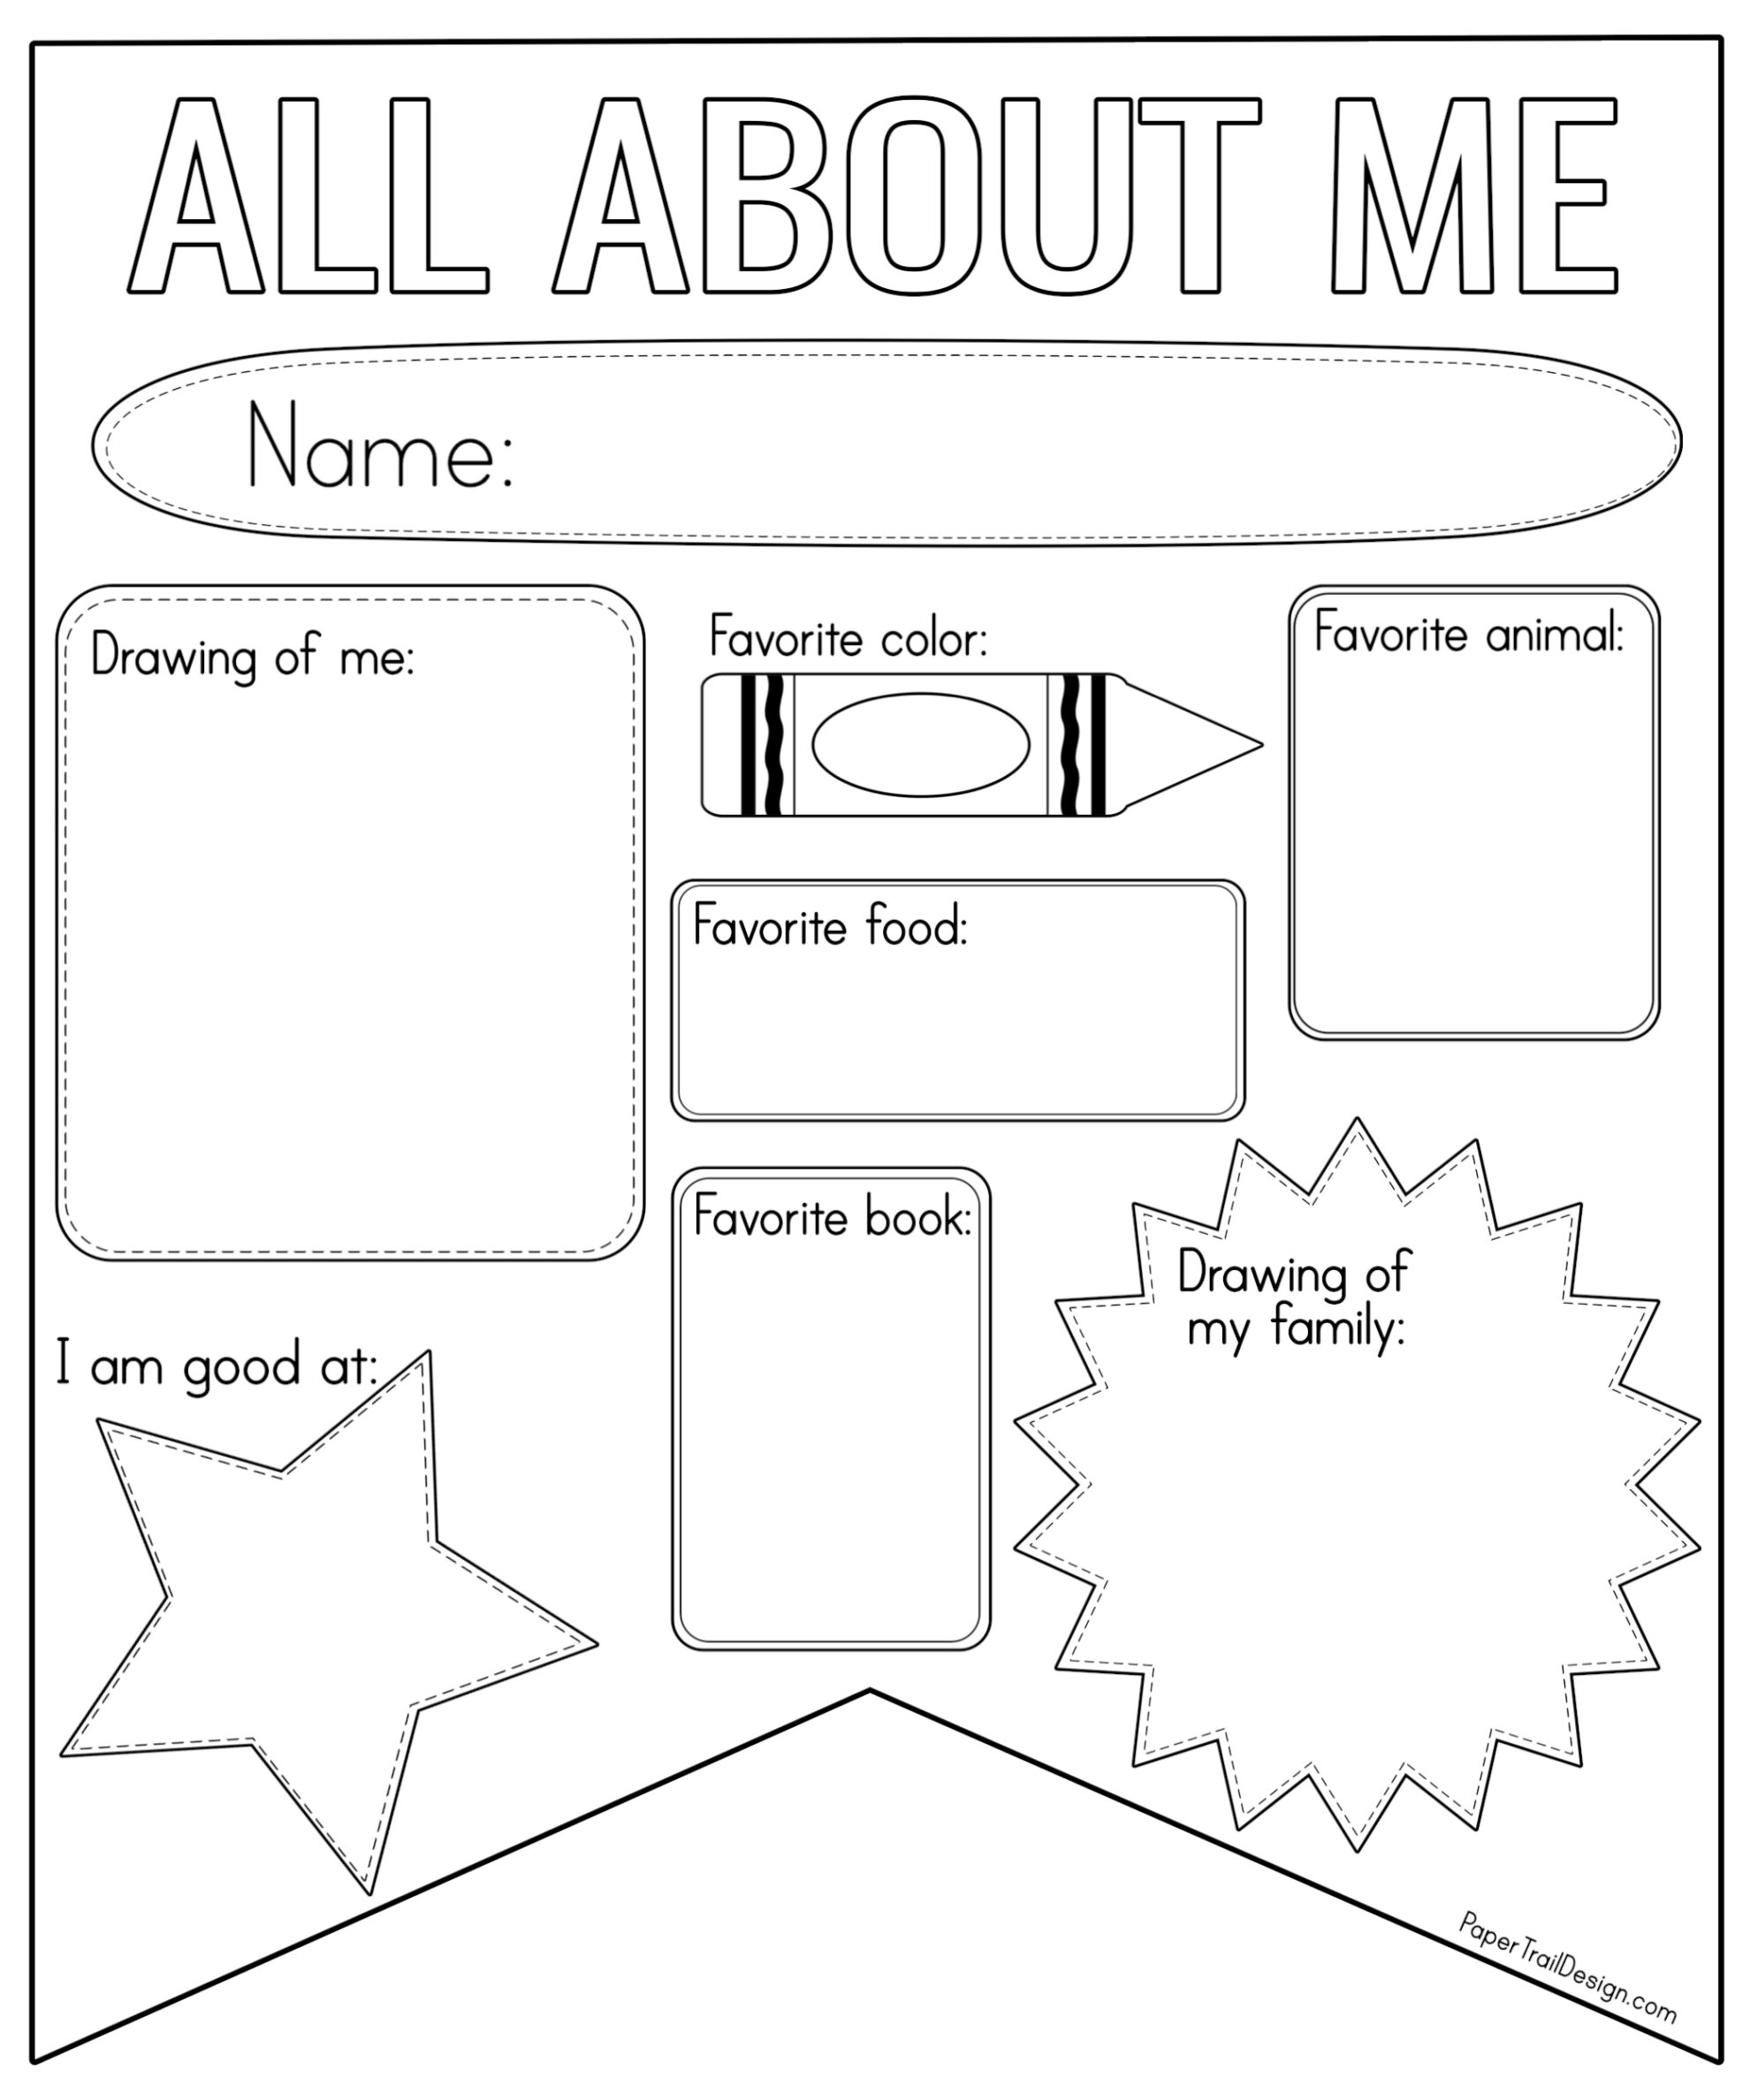 All About Me Worksheet Printable  Paper Trail Design Throughout All About Me Worksheet